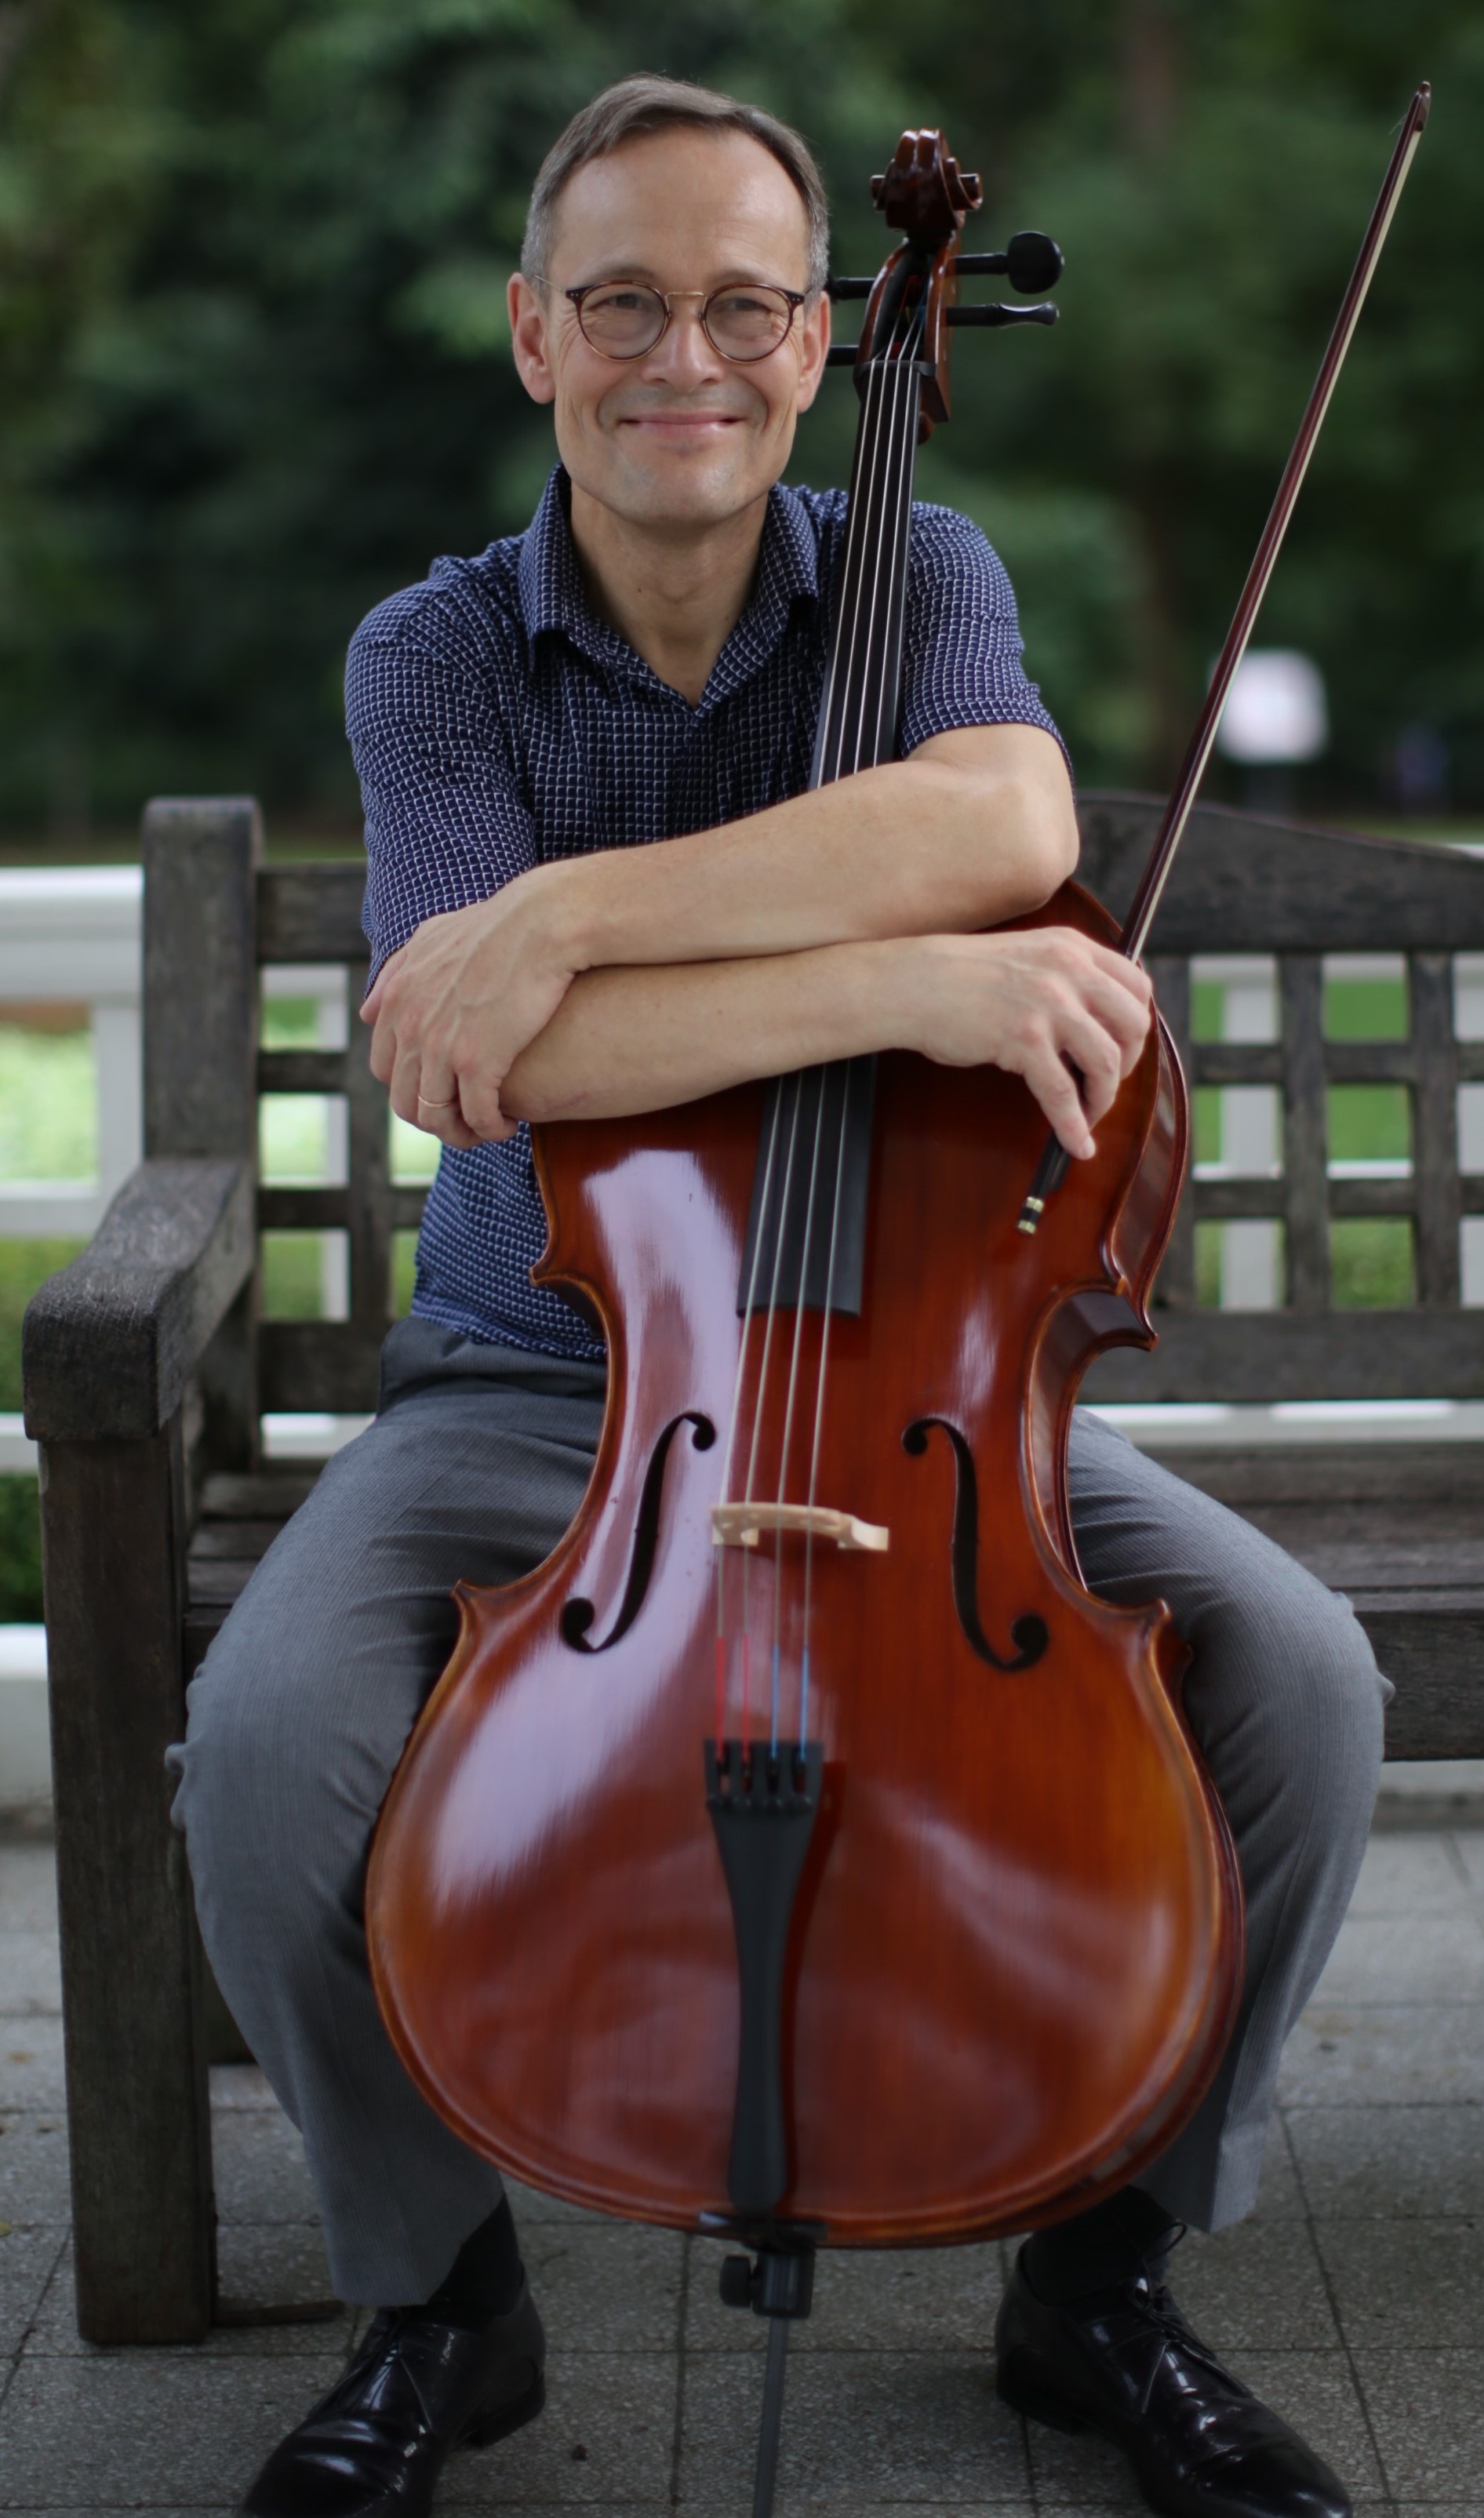 Violoncello: German Violoncellist And Composer, Christoph Theinert, Soloist And Chamber Musician. 1900x3210 HD Wallpaper.